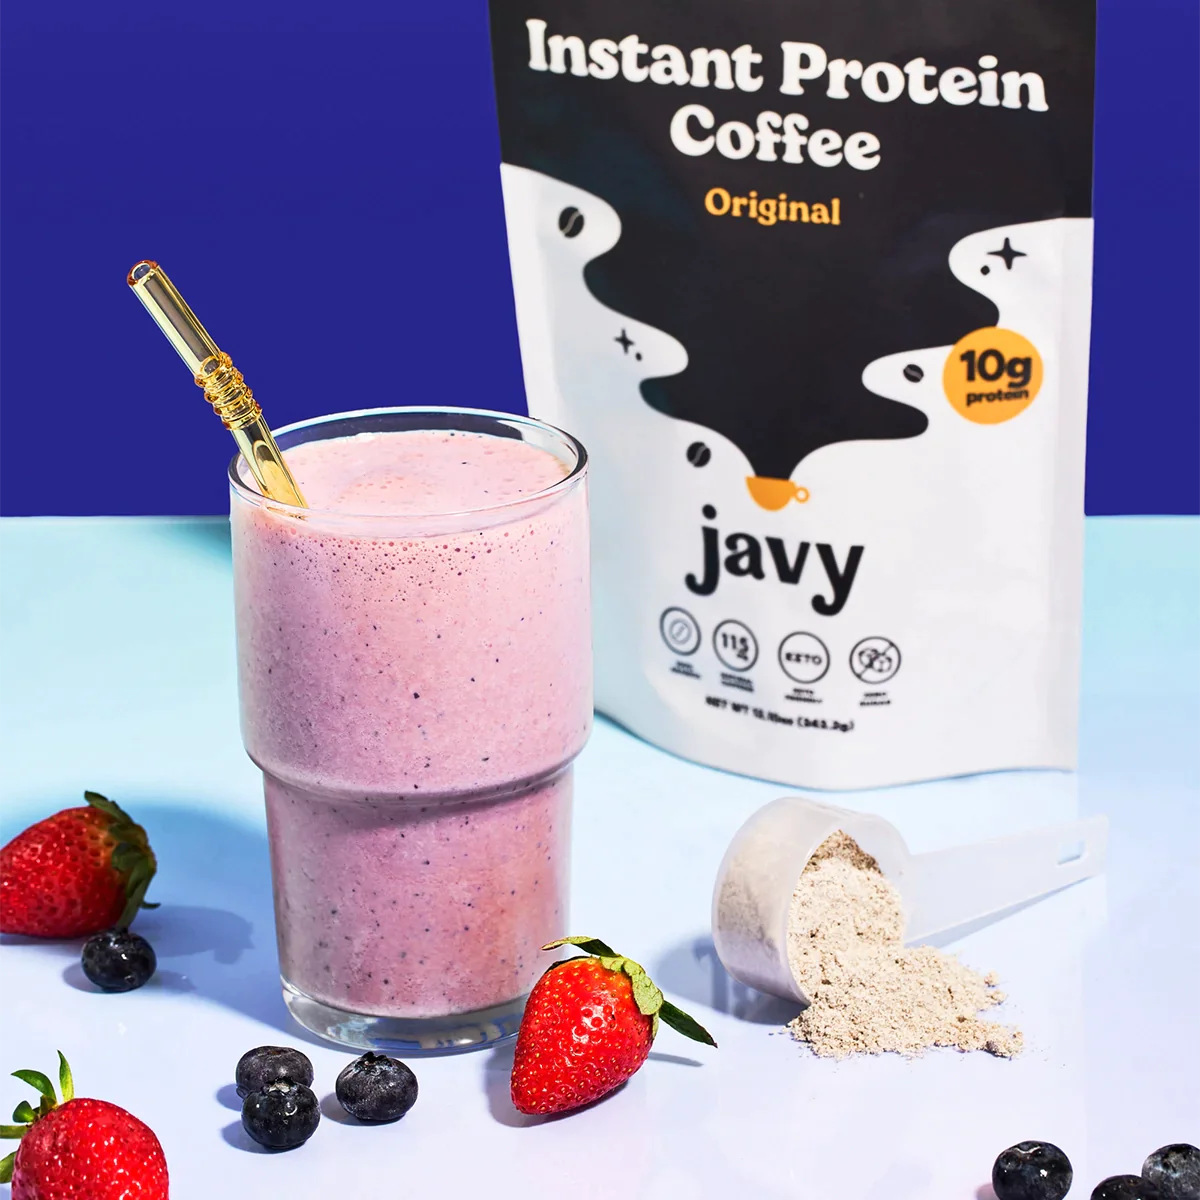 Javy Premium Instant Coffee - Protein Coffee - Protein Shake, Iced Coffee,  Protein Drinks, Delicious Keto Friendly and Gluten Free, 24 Servings 